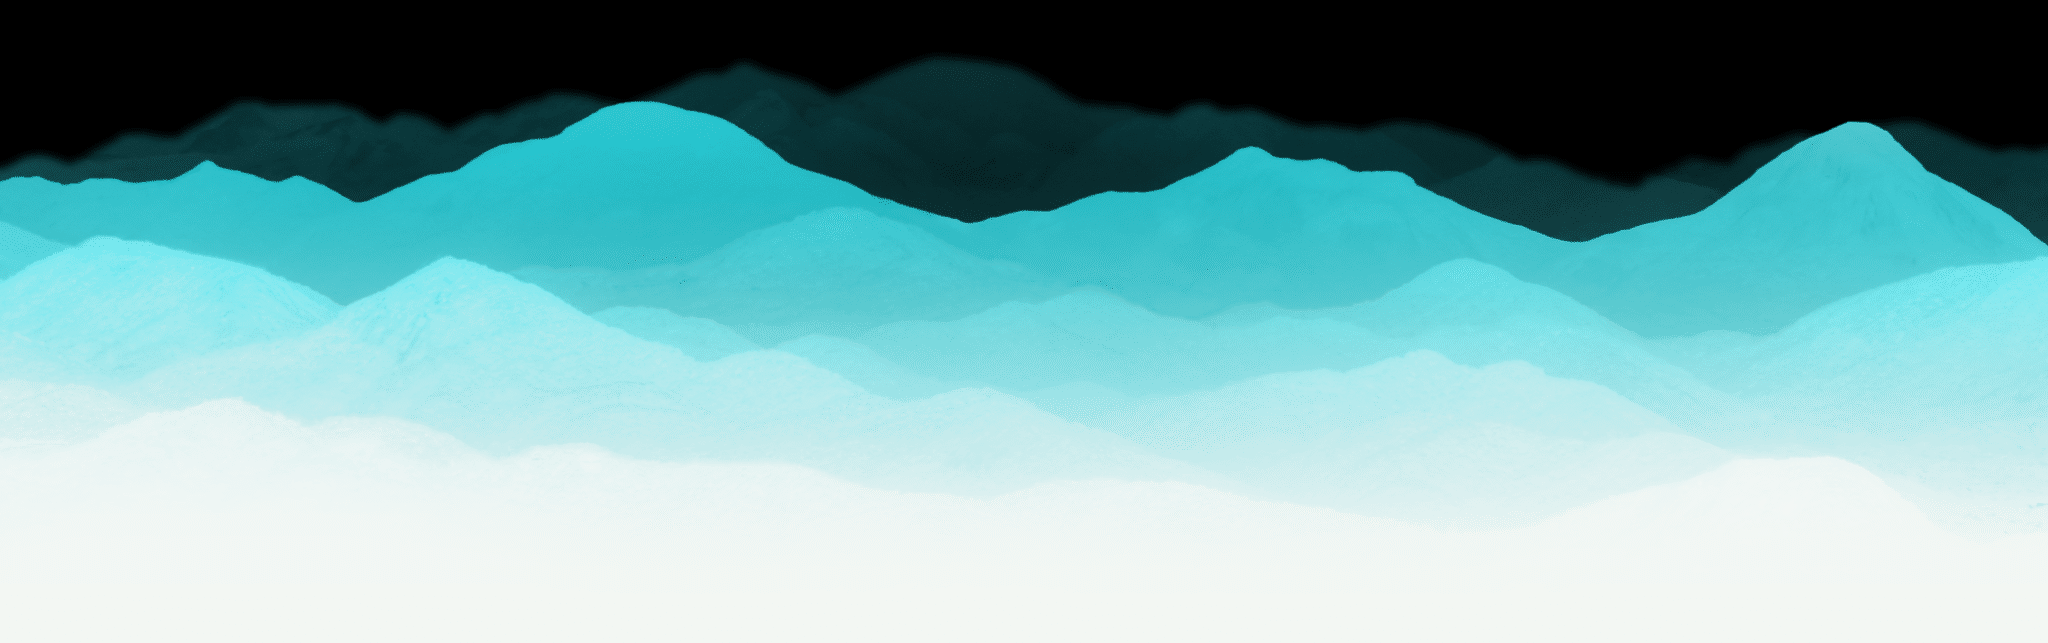 Decorative: Teal mountains with various shades to give the perception of depth on the page